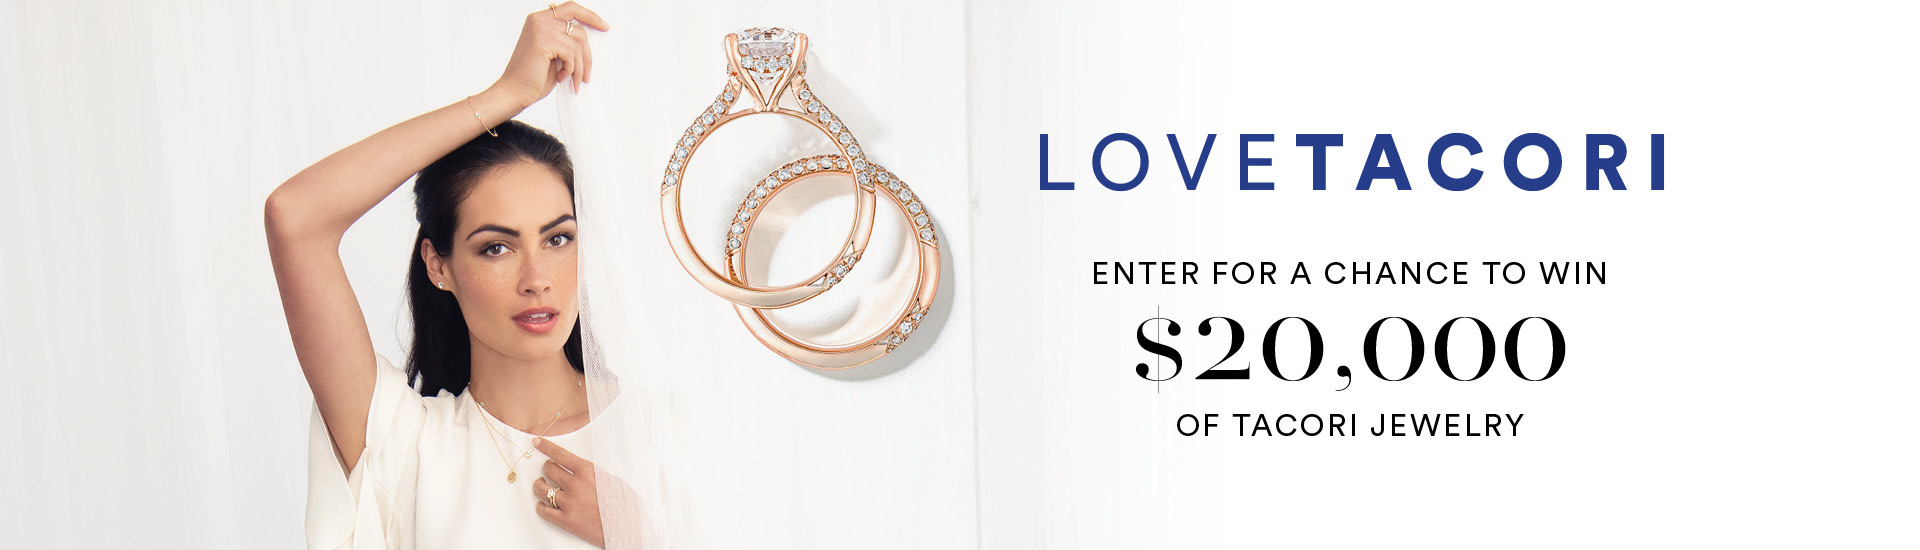 GMG Jewellers Participates in First-Ever Love Tacori Contest Offering $100,000 in Jewellery